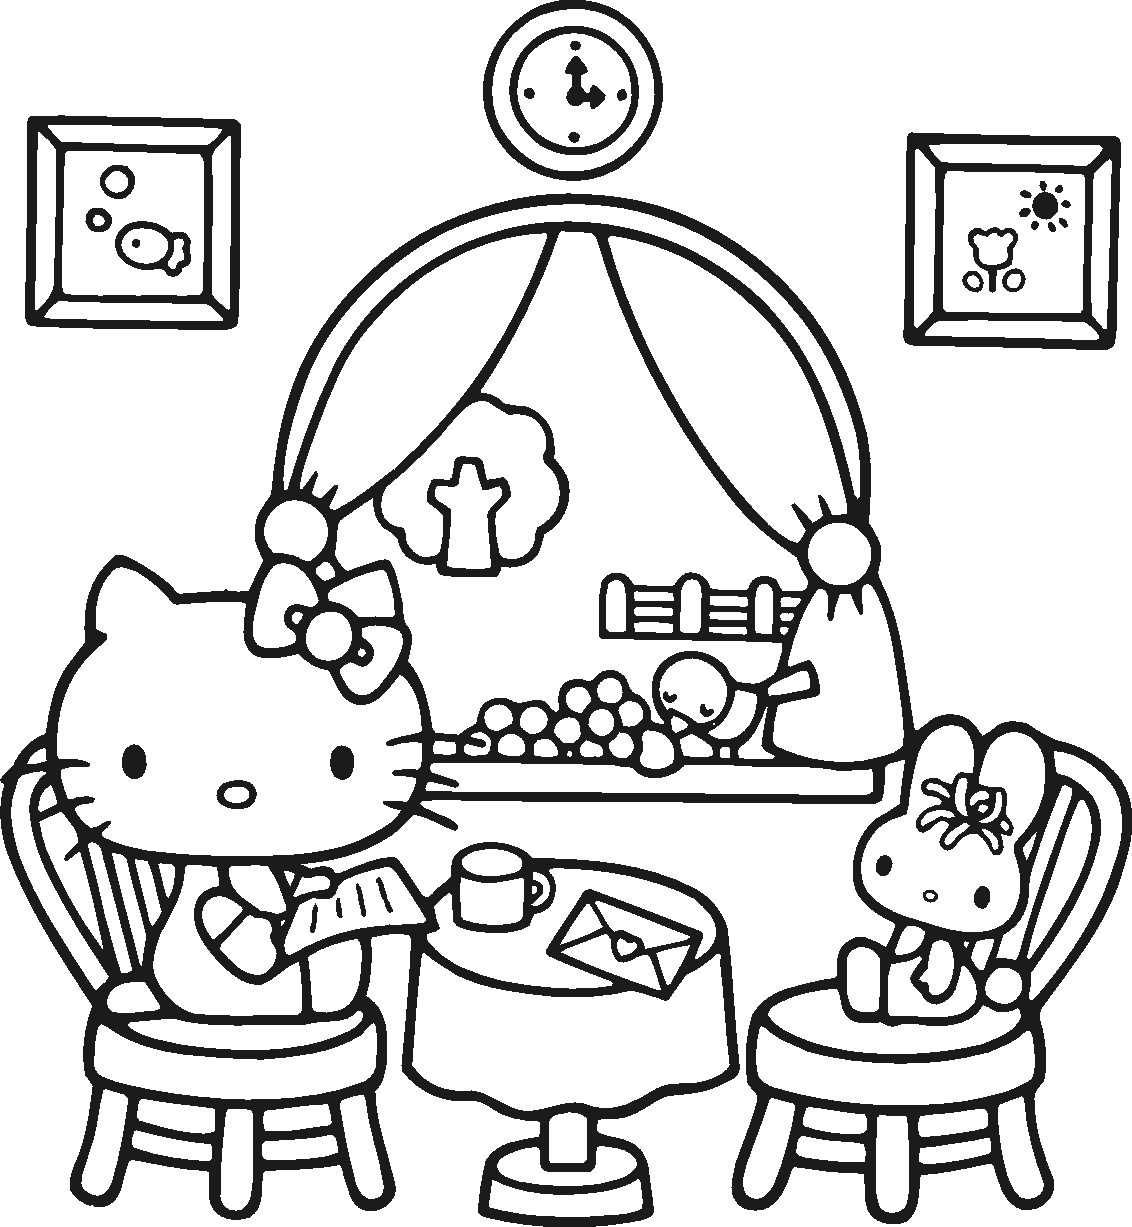 Free Kids Pritout Hello Kitty Valentine Day Celebration Coloring Pages